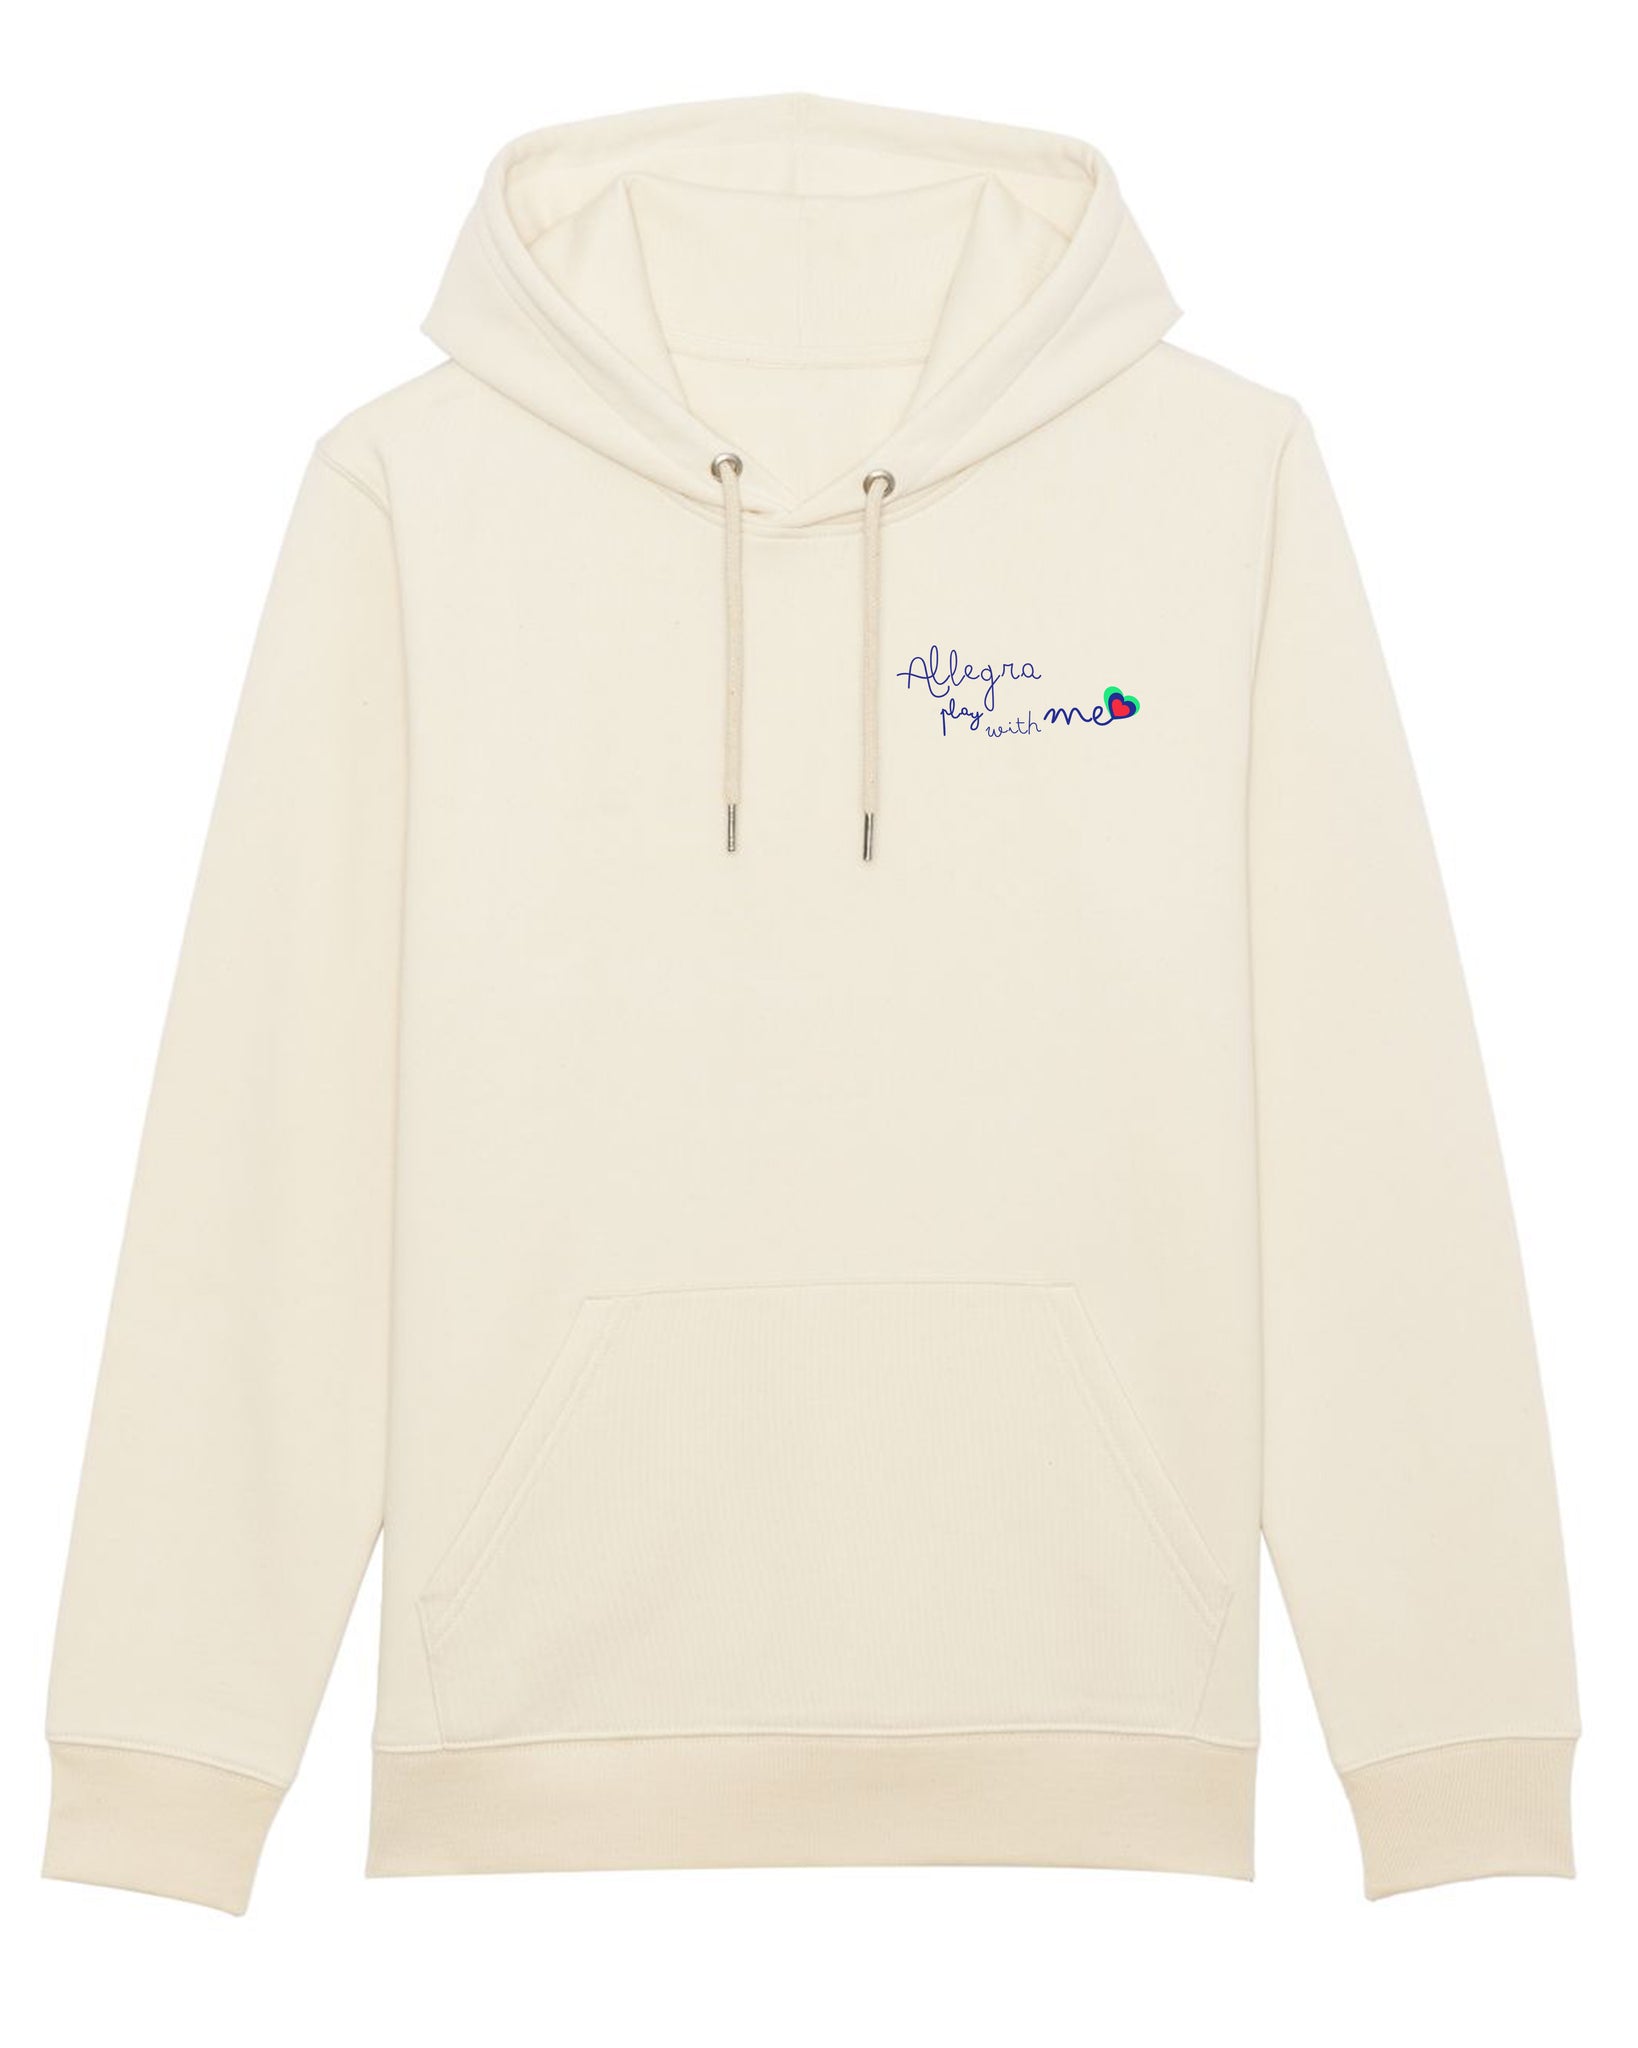 Embroidered Allegra Play With Me Hoodie